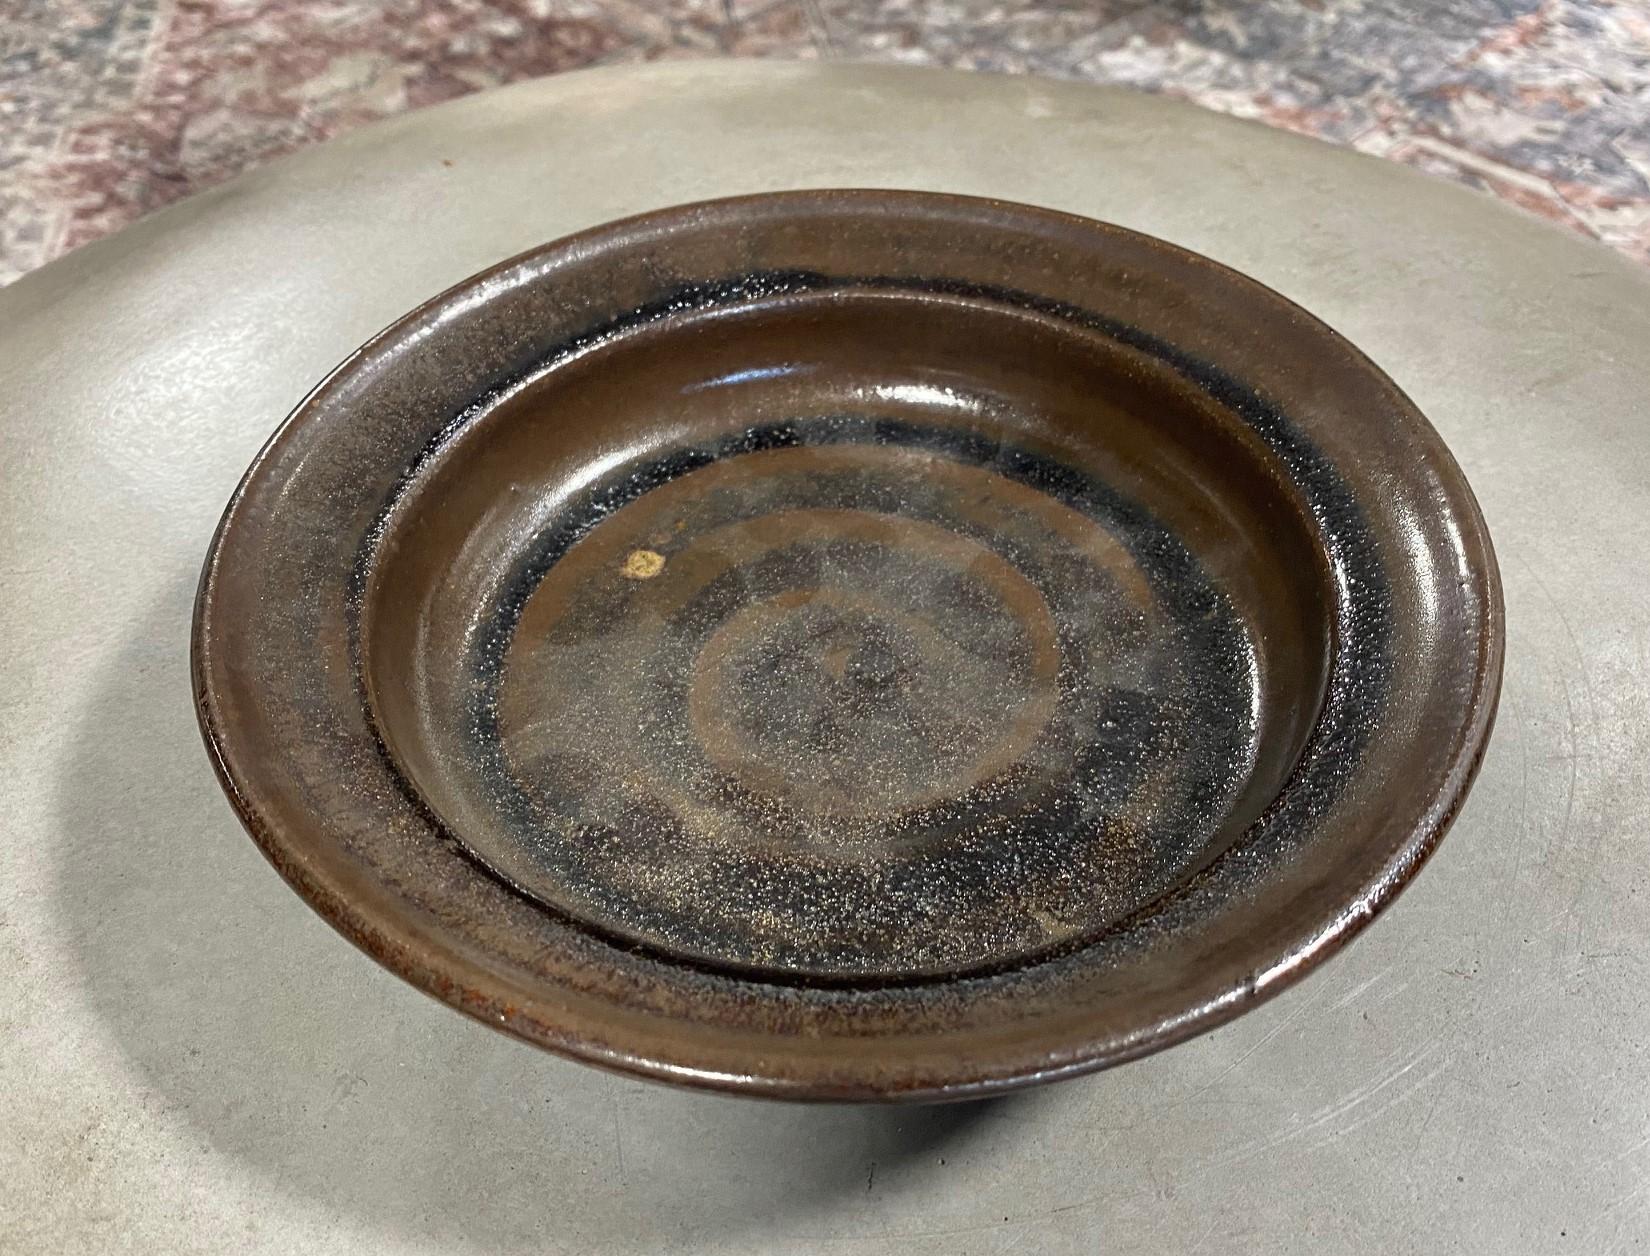 A gorgeous work by 20th century master American and renowned Minnesota studio potter/artist Warren MacKenzie. 

The three-footed tenmoku glazed bowl is signed/ stamped along the foot rim by MacKenzie and features a unique decorative pattern. The